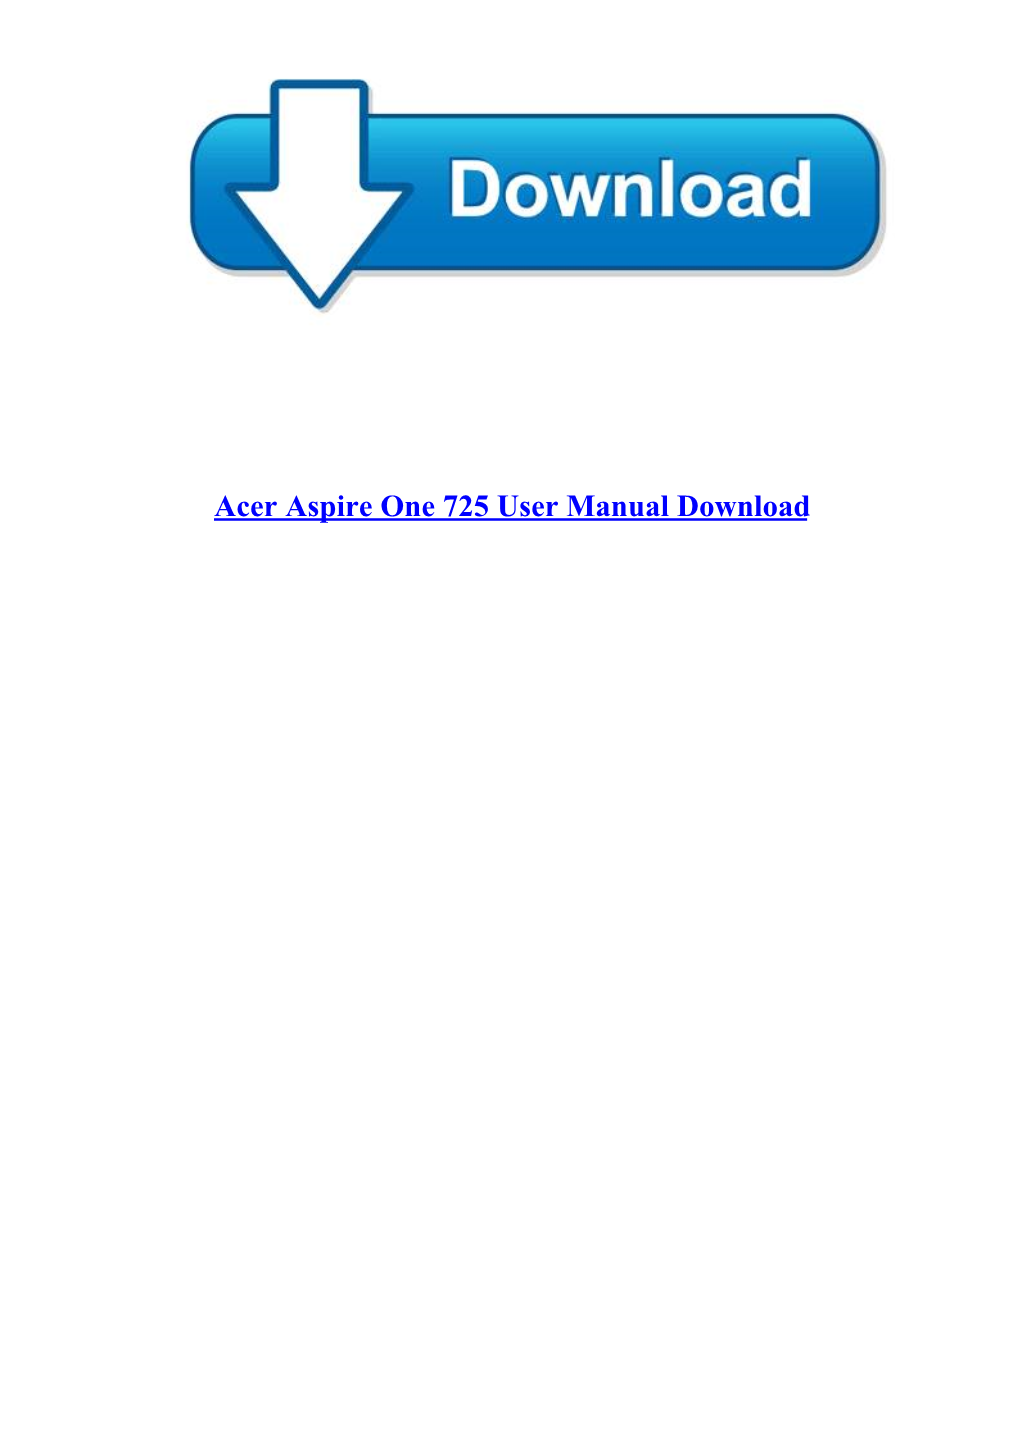 Acer Aspire One 725 User Manual Download Acer Aspire One 725 User Manual